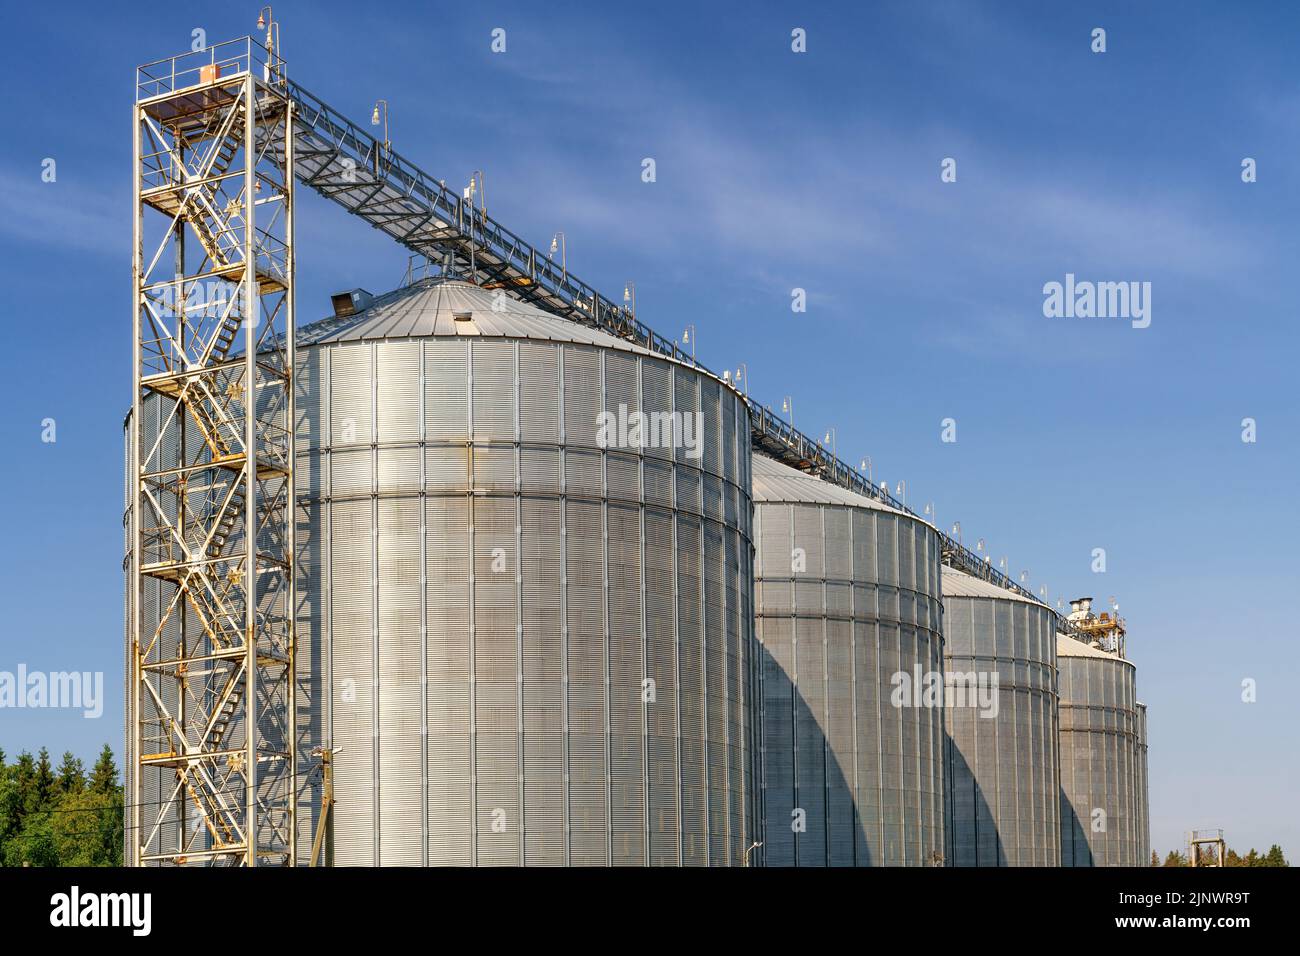 Large metal elevator tanks against a bright blue sky. Silo or granary at sunny day Stock Photo